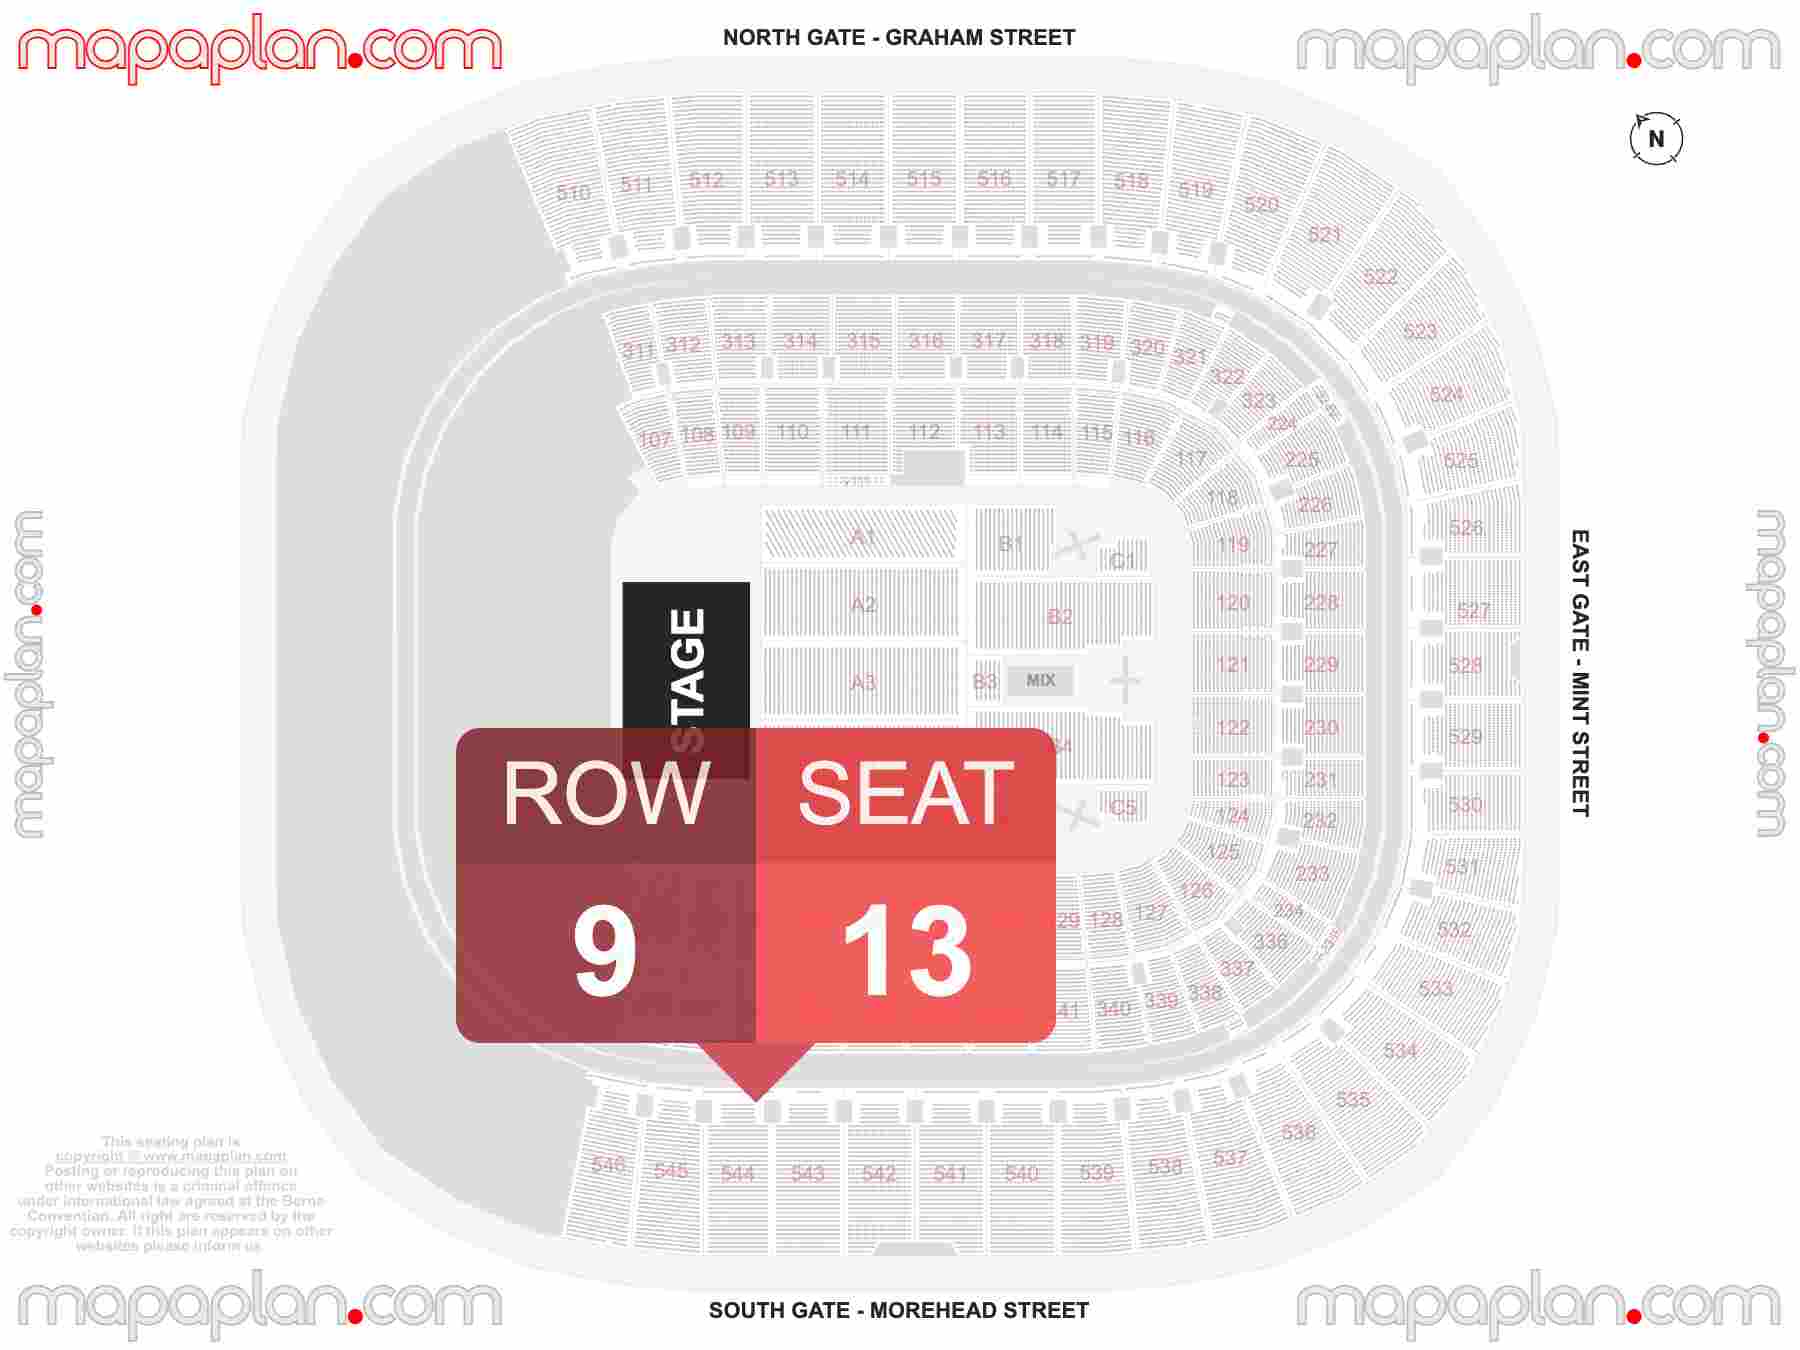 Charlotte Bank of America Stadium seating chart Concert detailed seat numbers and row numbering chart with interactive map plan layout